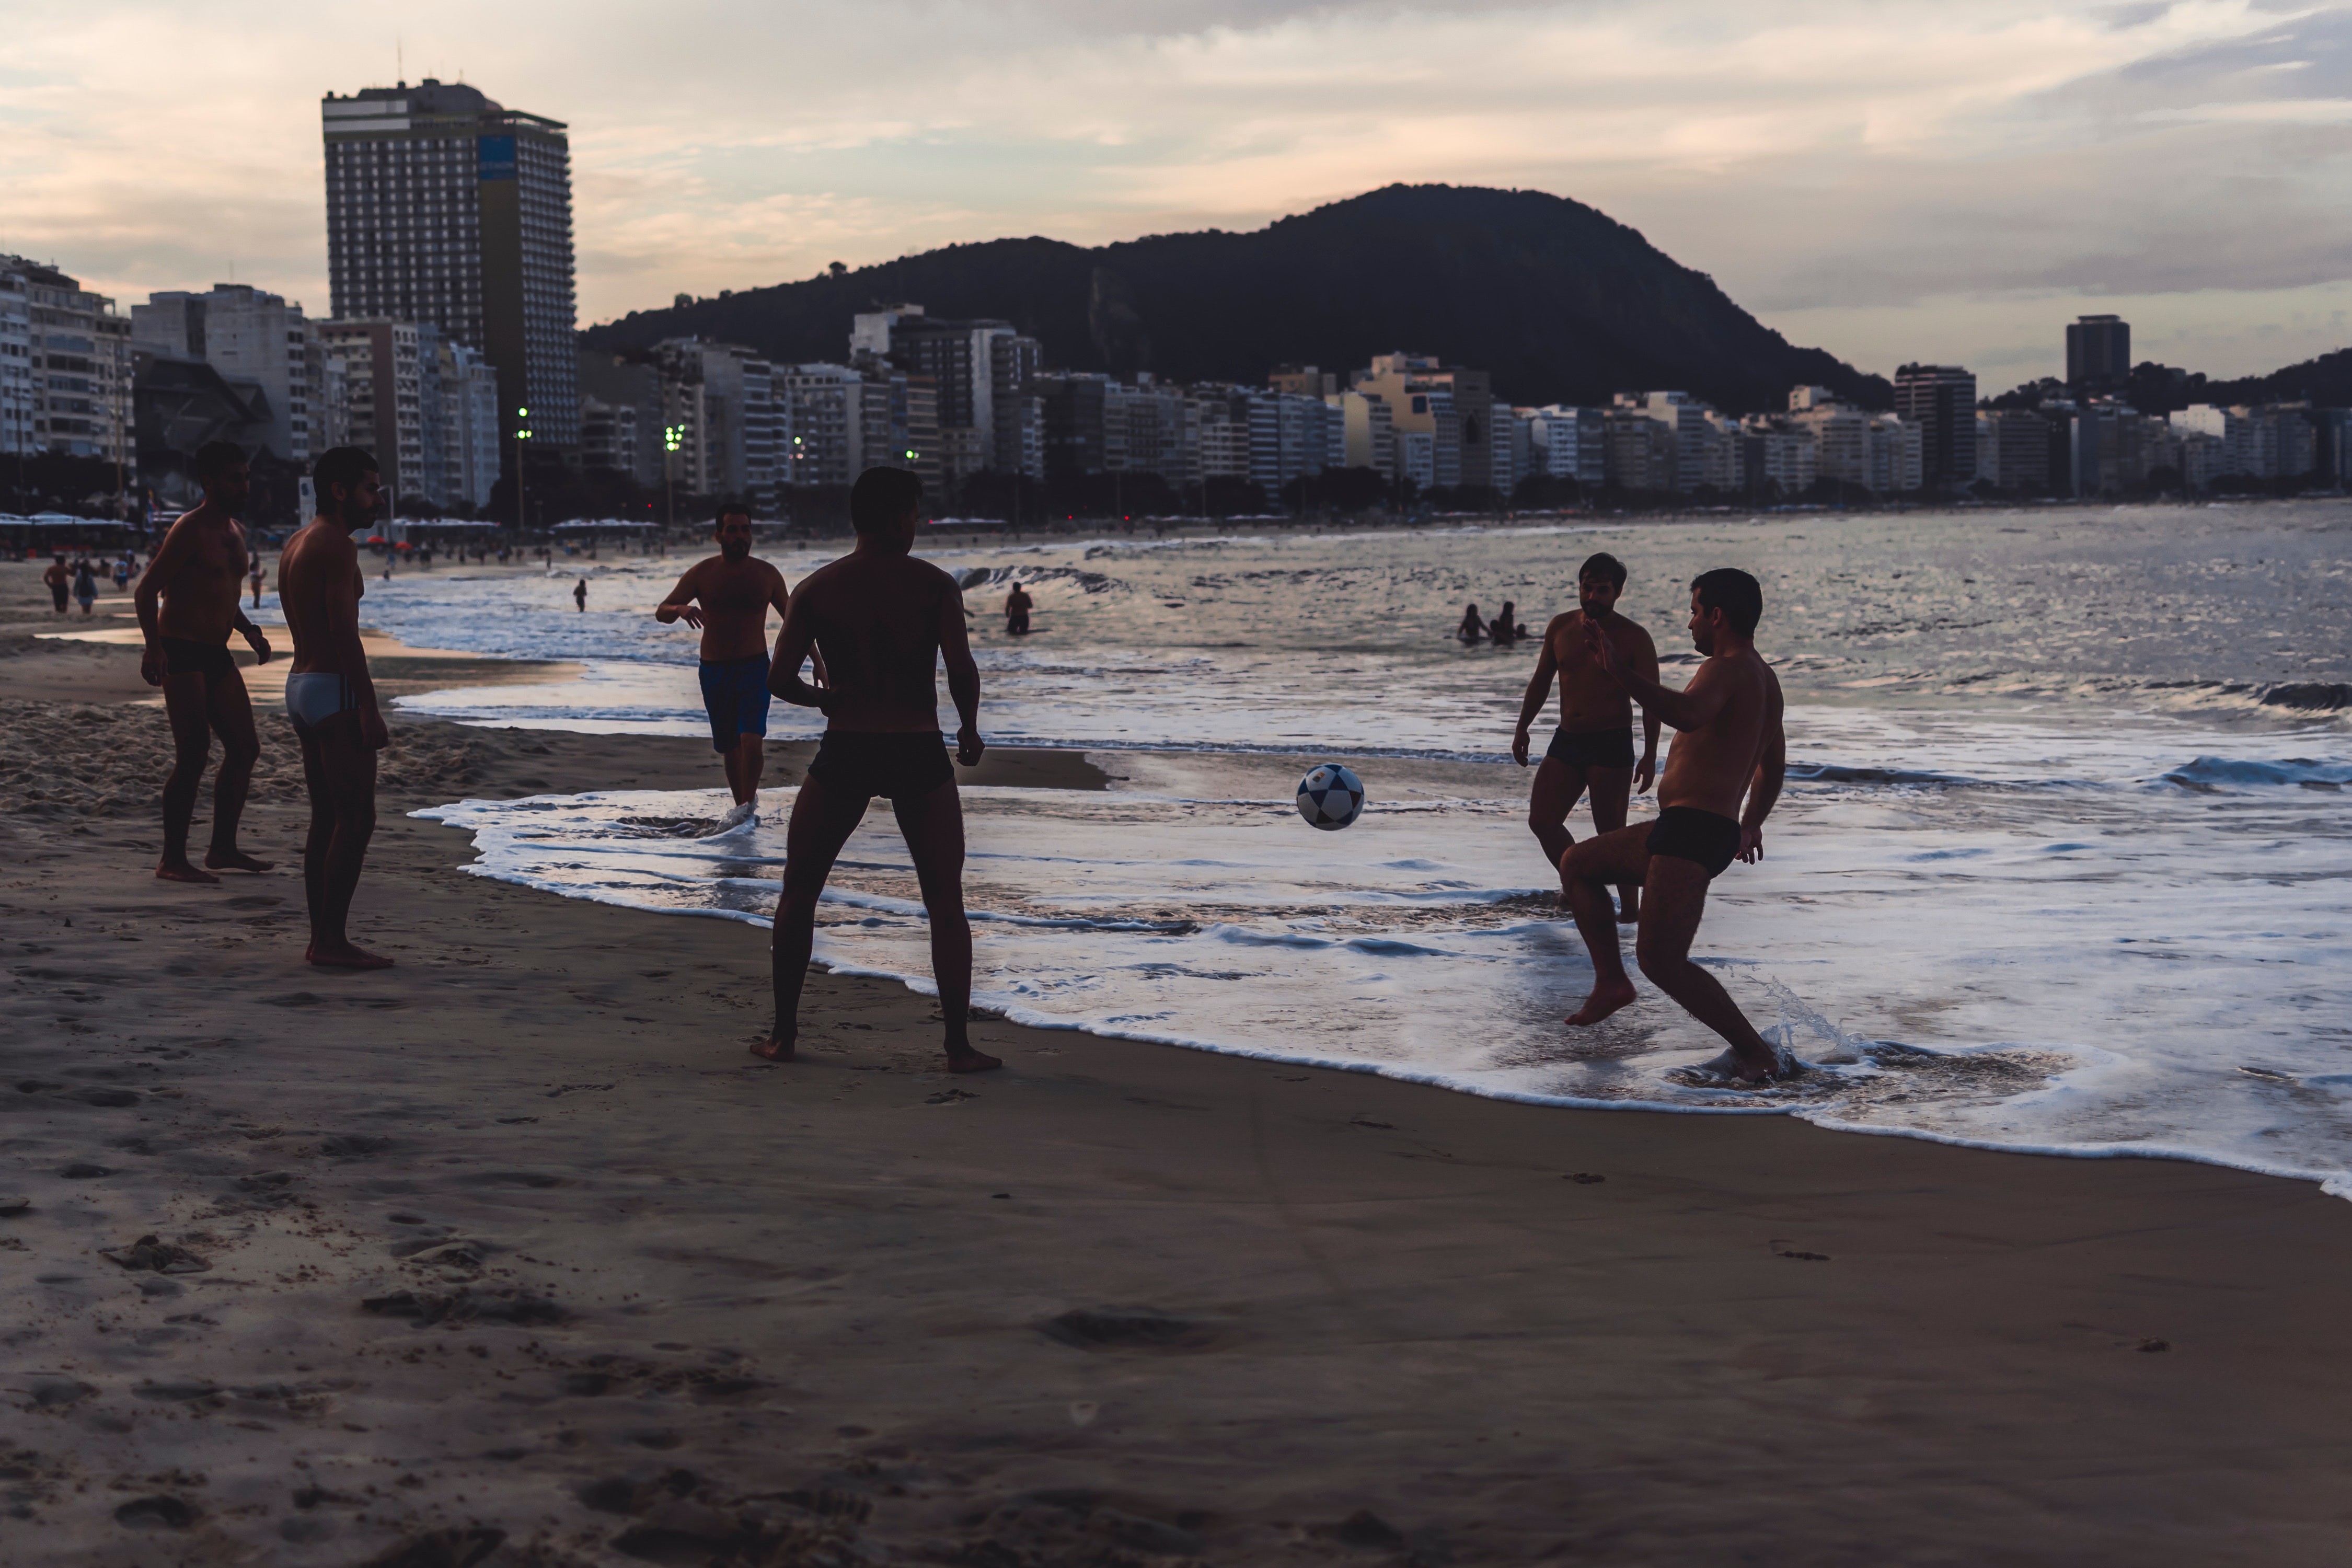 men-playing-ball-by-the-seashore-2559997